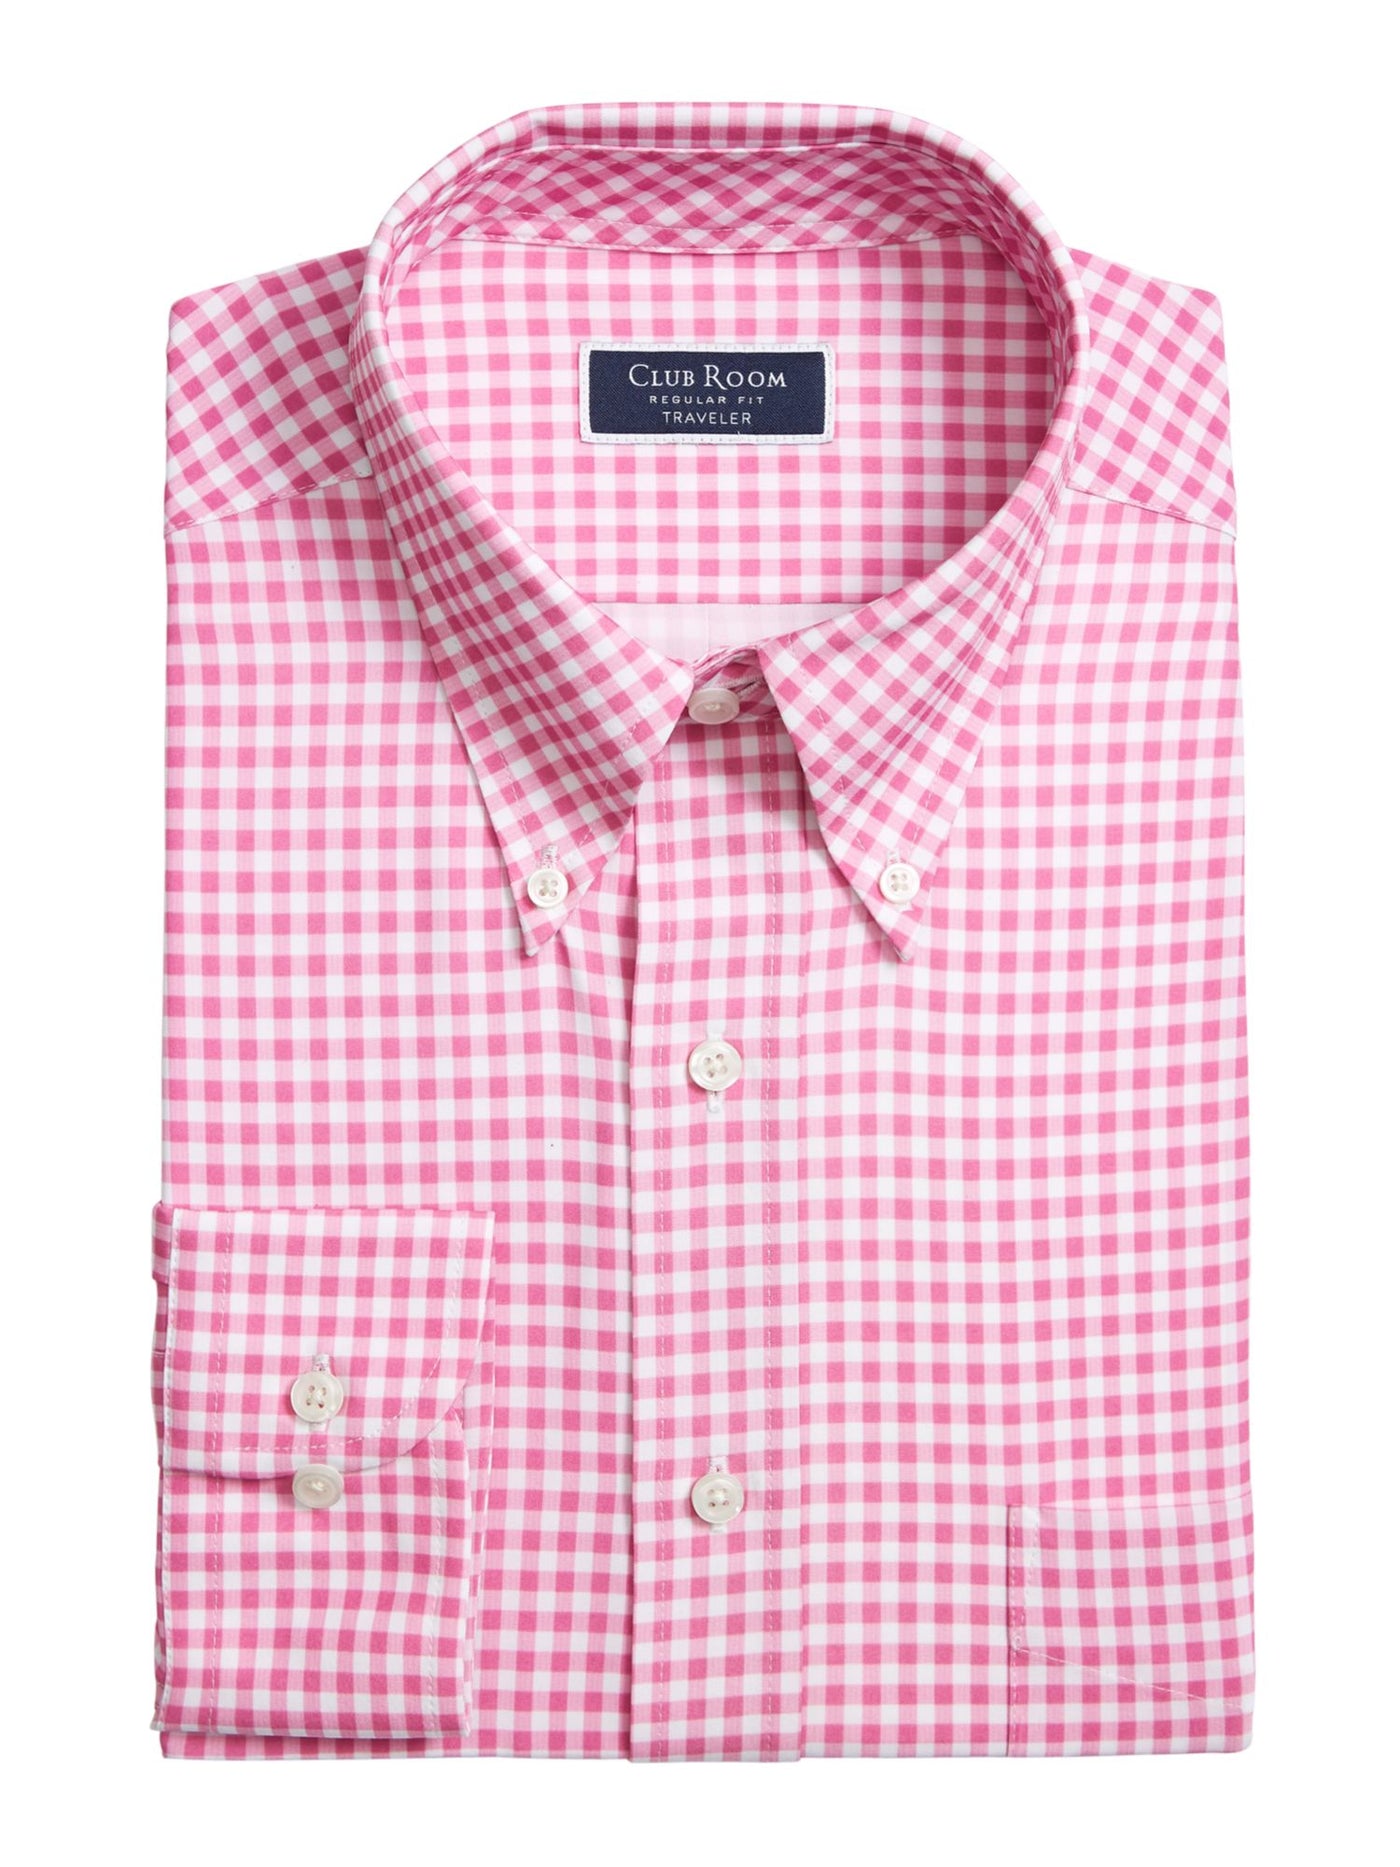 CLUBROOM Mens Traveler Pink Gingham Collared Classic Fit Button Down Shirt 14.5- 32/33